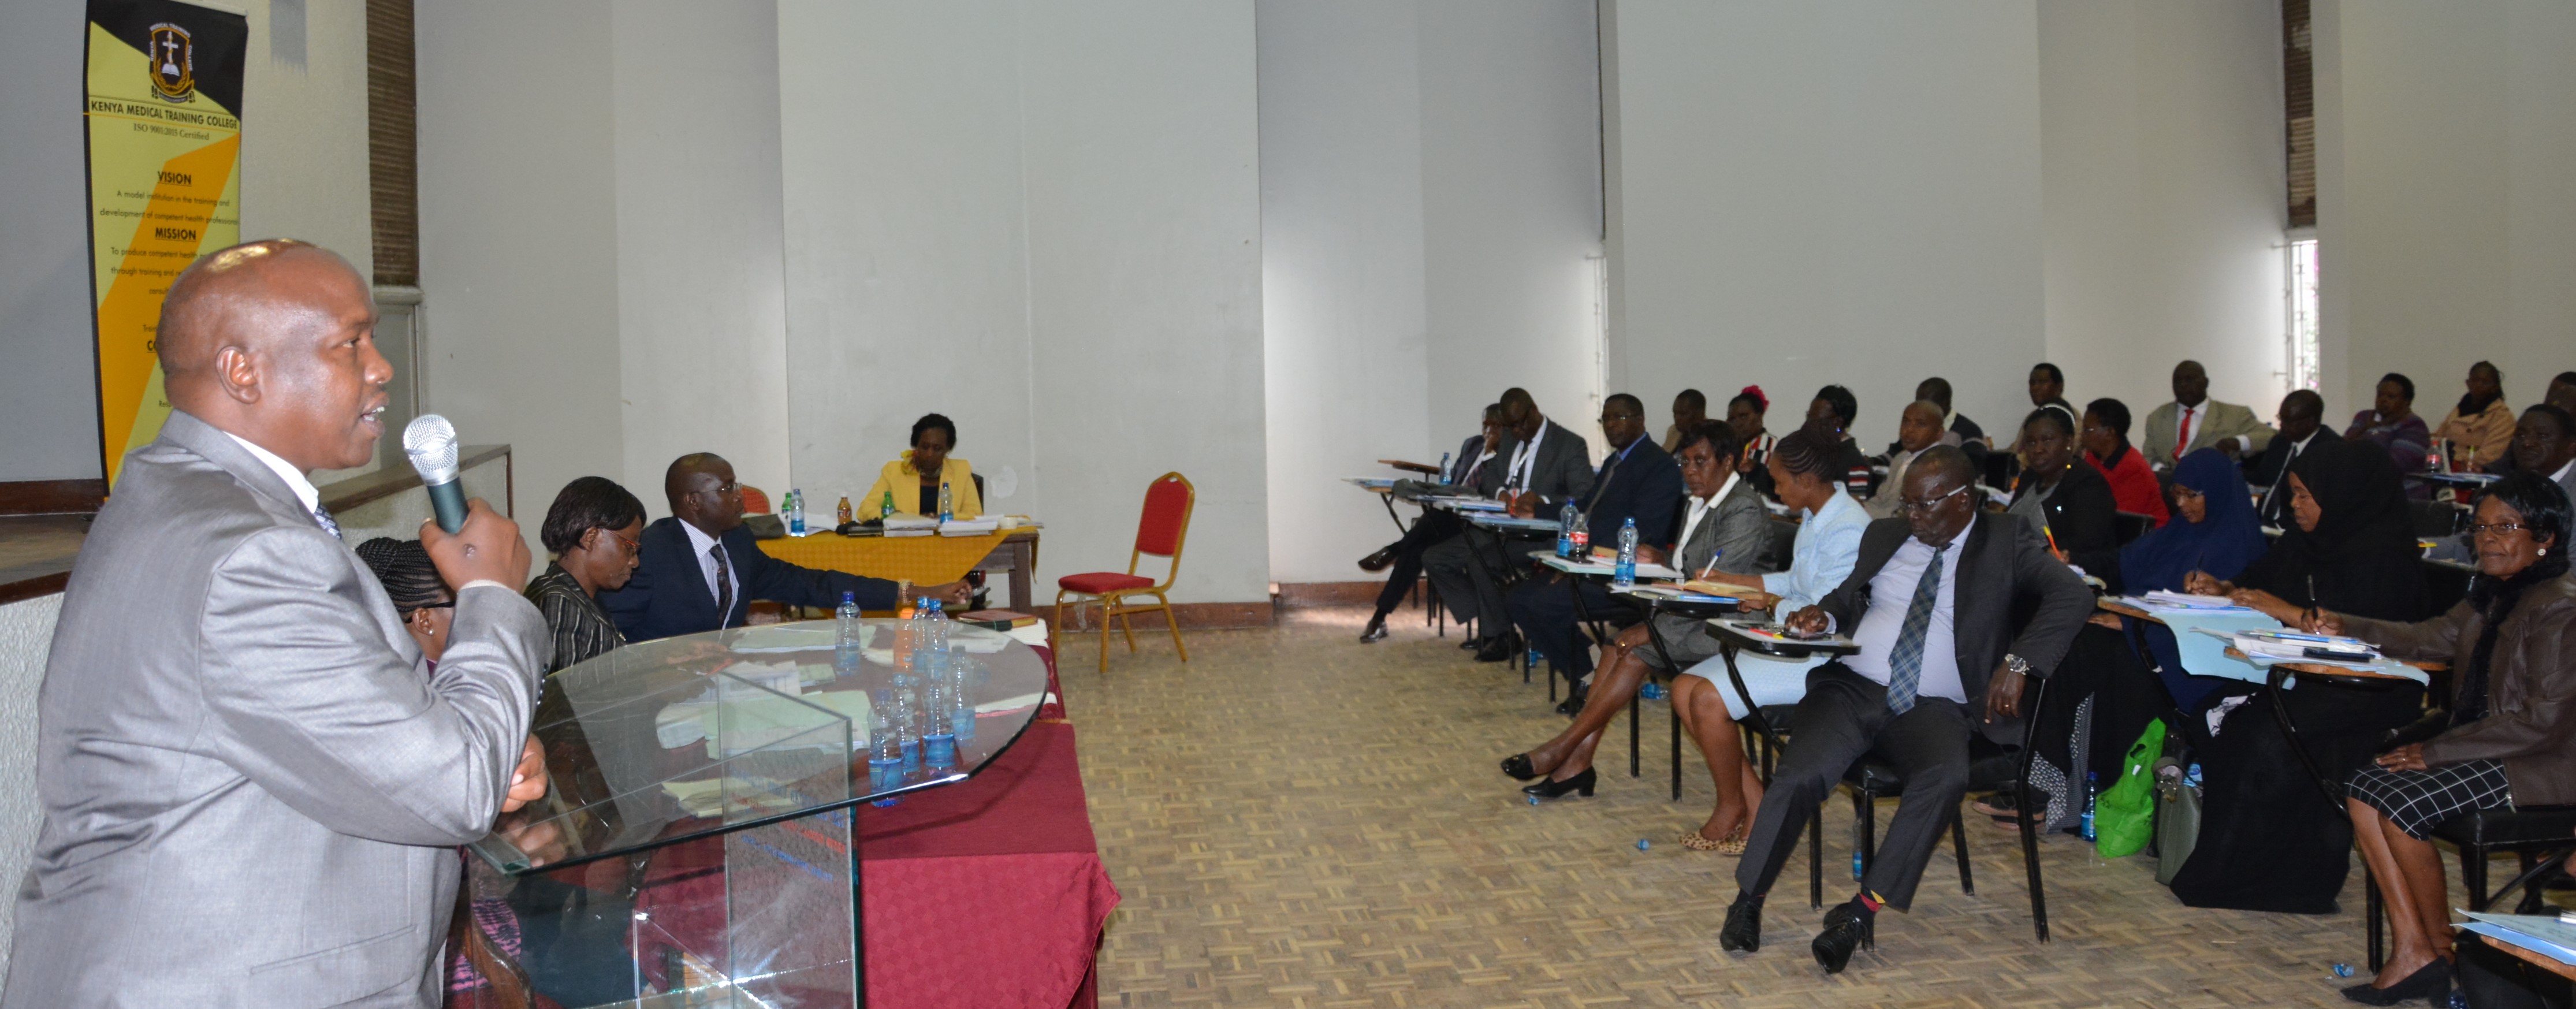 KMTC holds quarterly academic board meeting, reports excellent performance in student admission and enhanced training